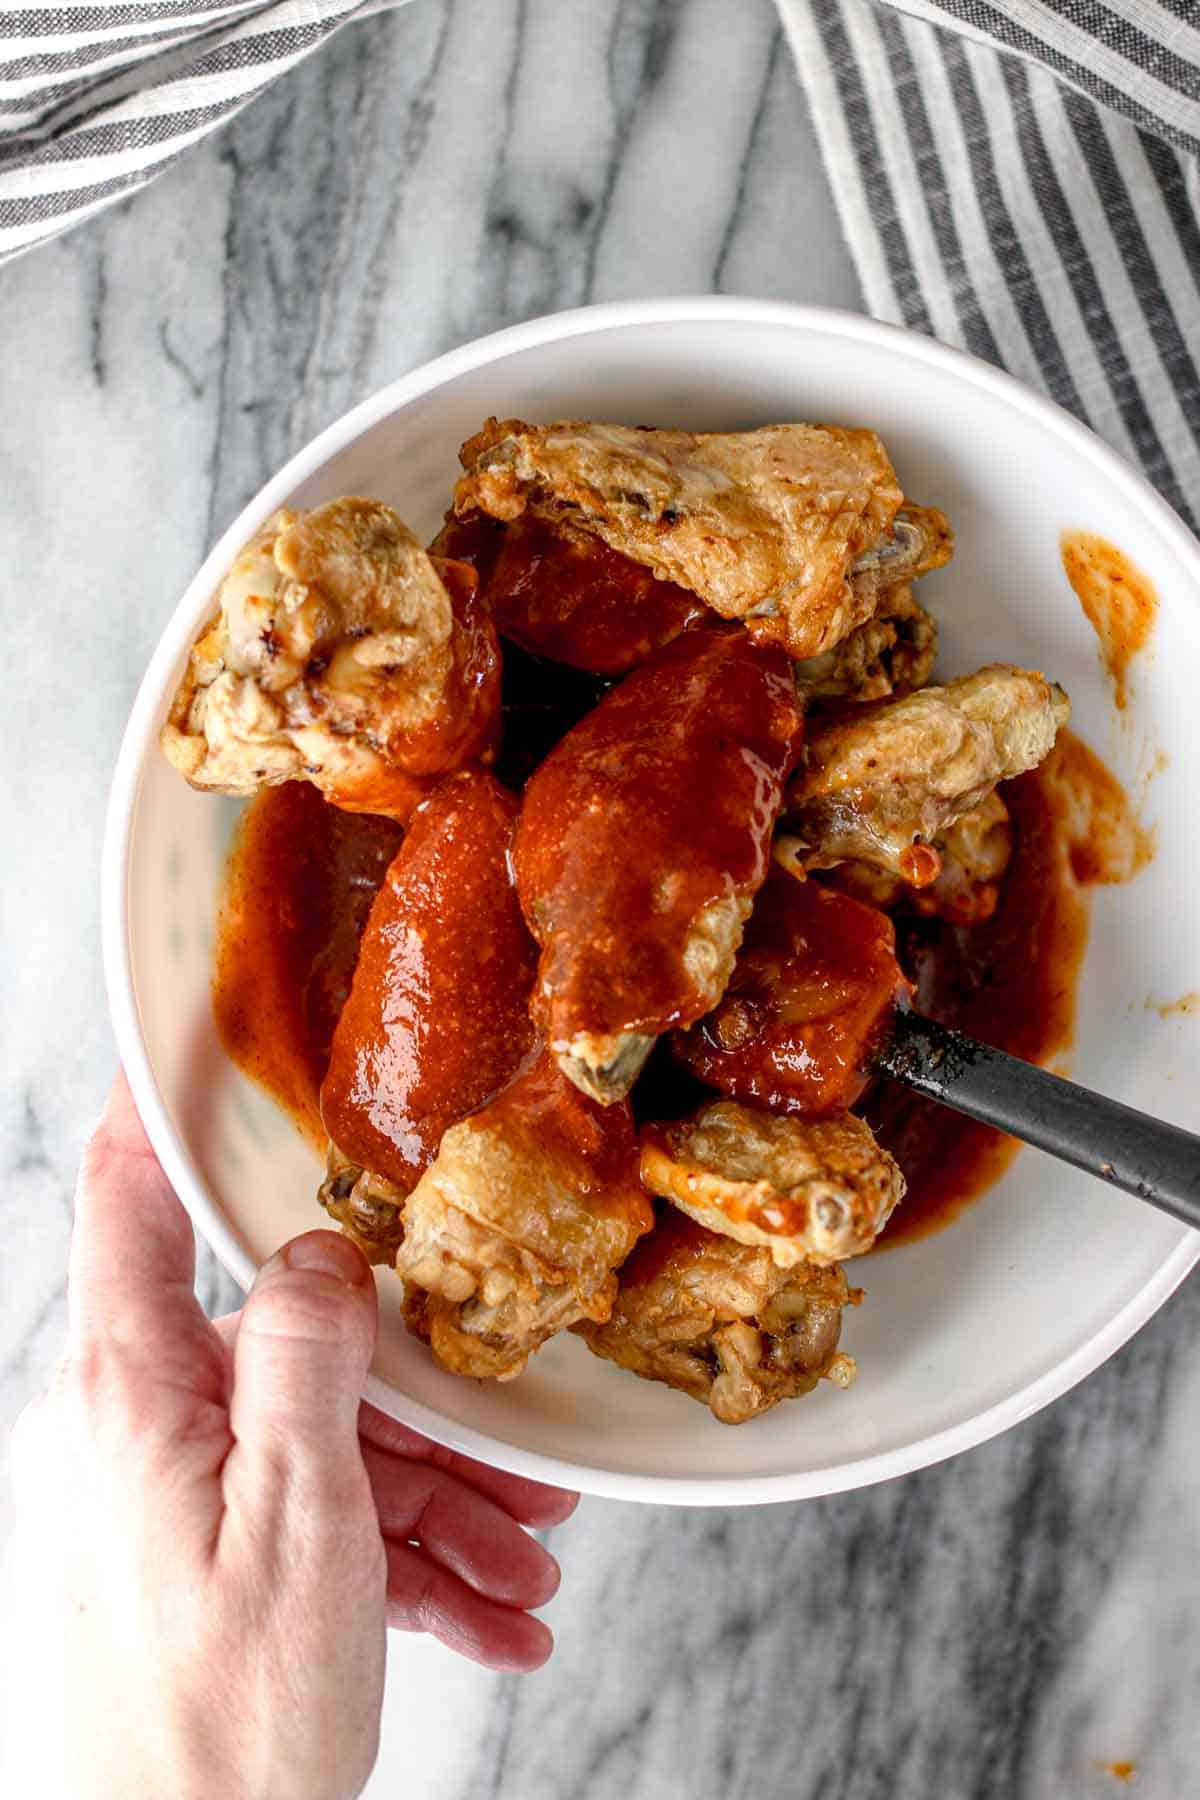 Dousing chicken wings in sauce.